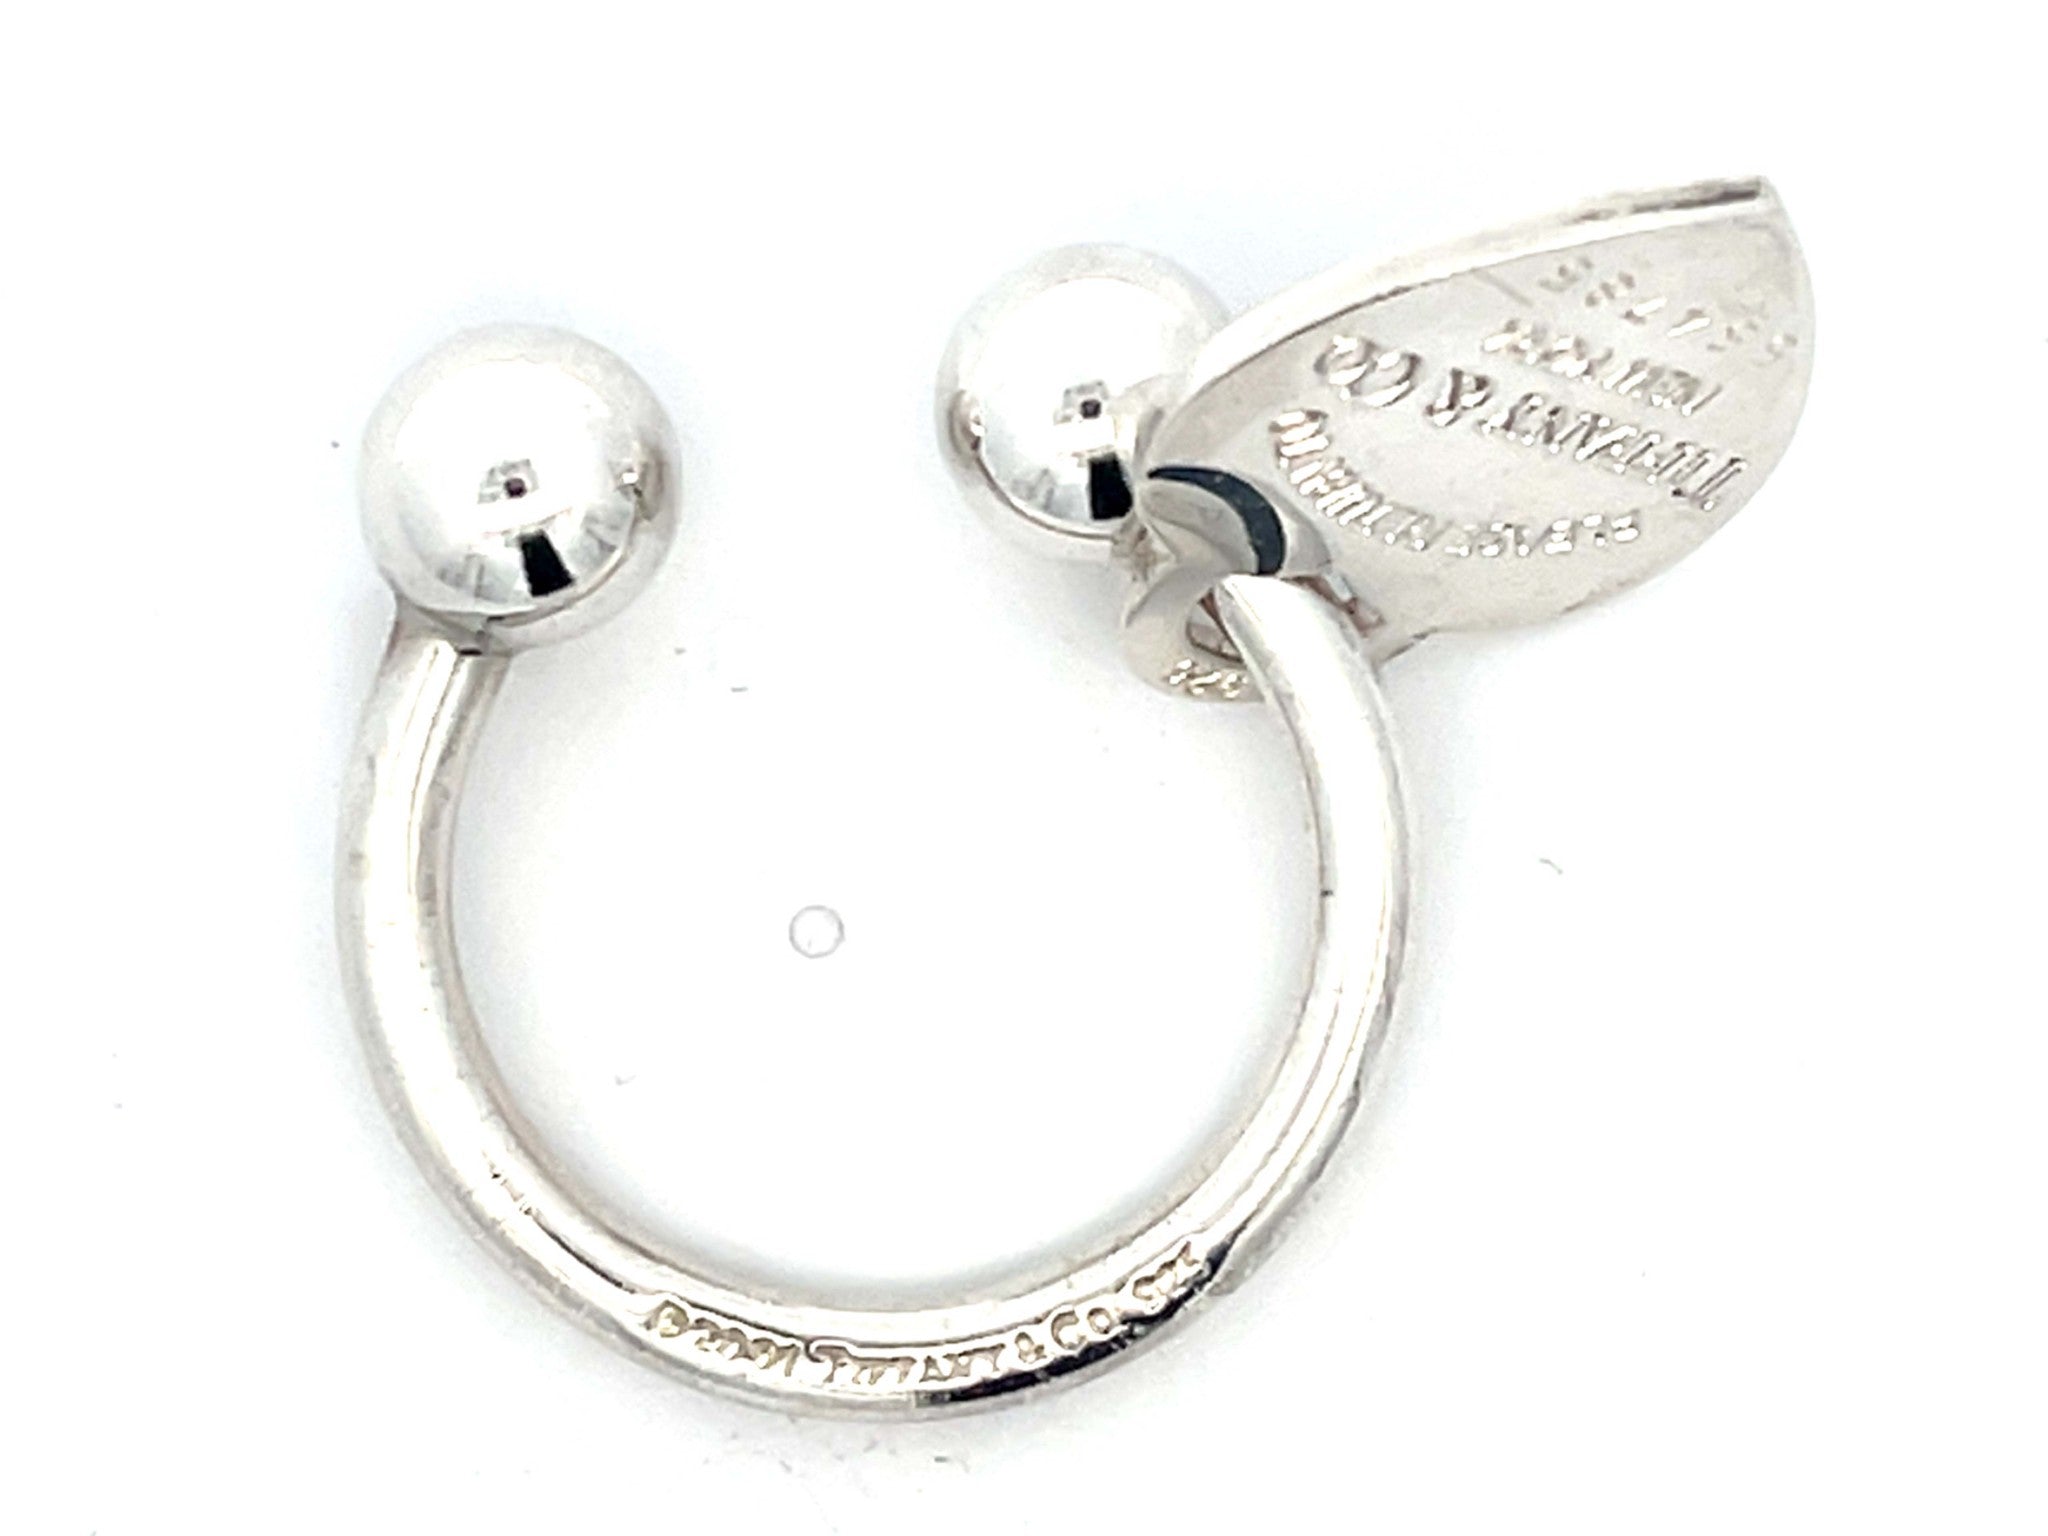 2001 Tiffany & Co. Heart Tag Key Ring in Sterling Silver